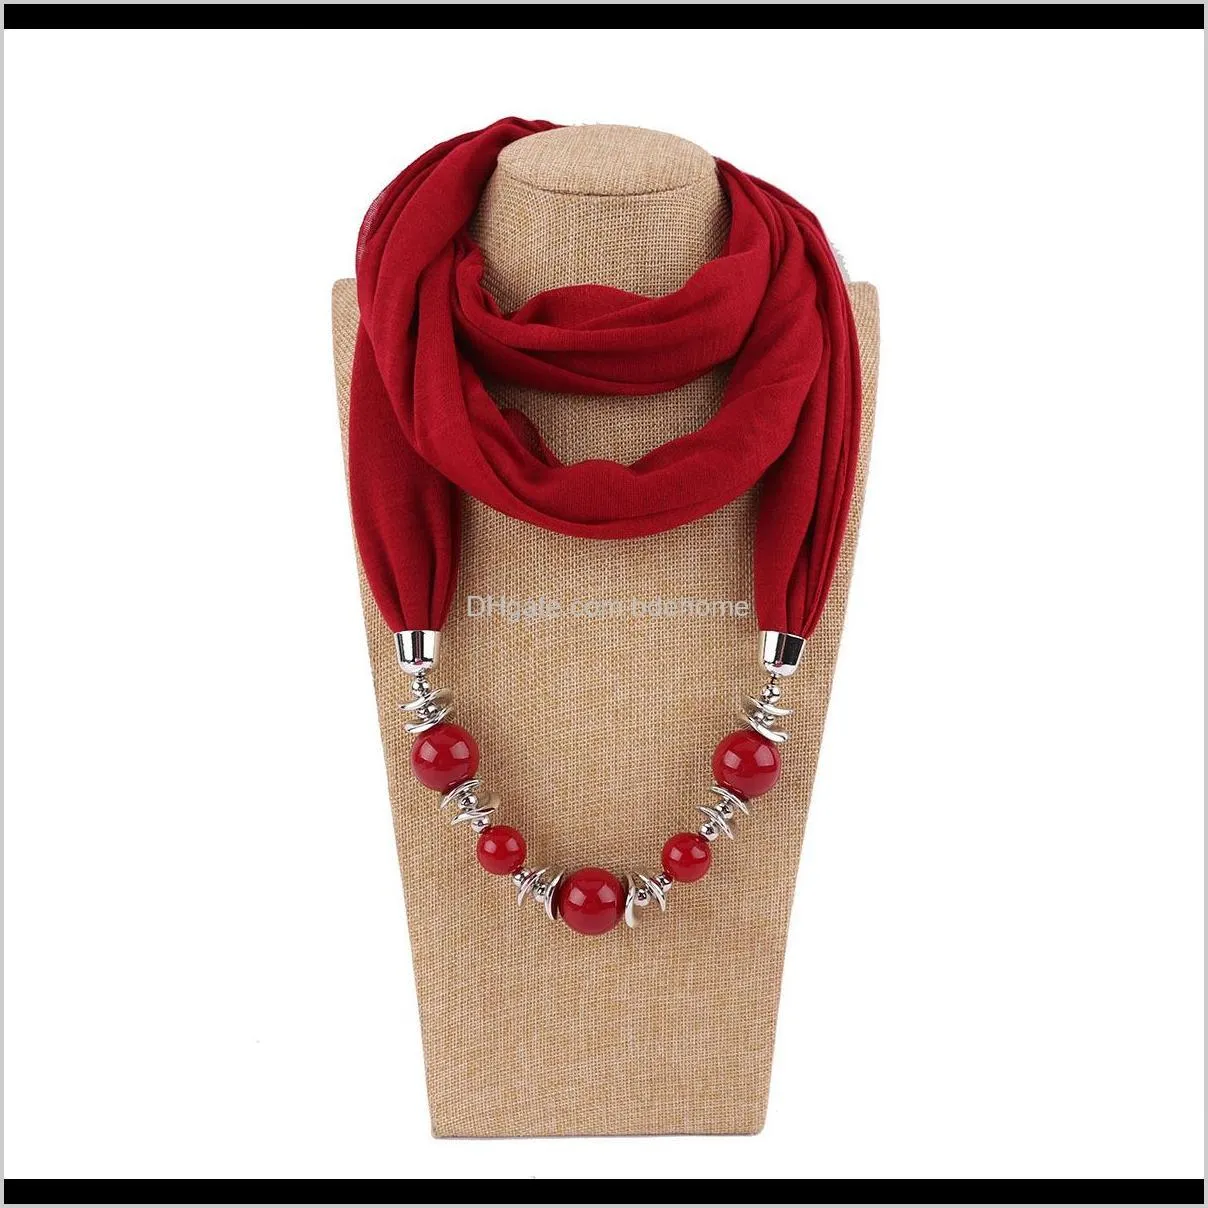 2020 solid jewelry statement necklace pendant scarf head scarves women foulard femme accessories muslim hijab stores winter scarf